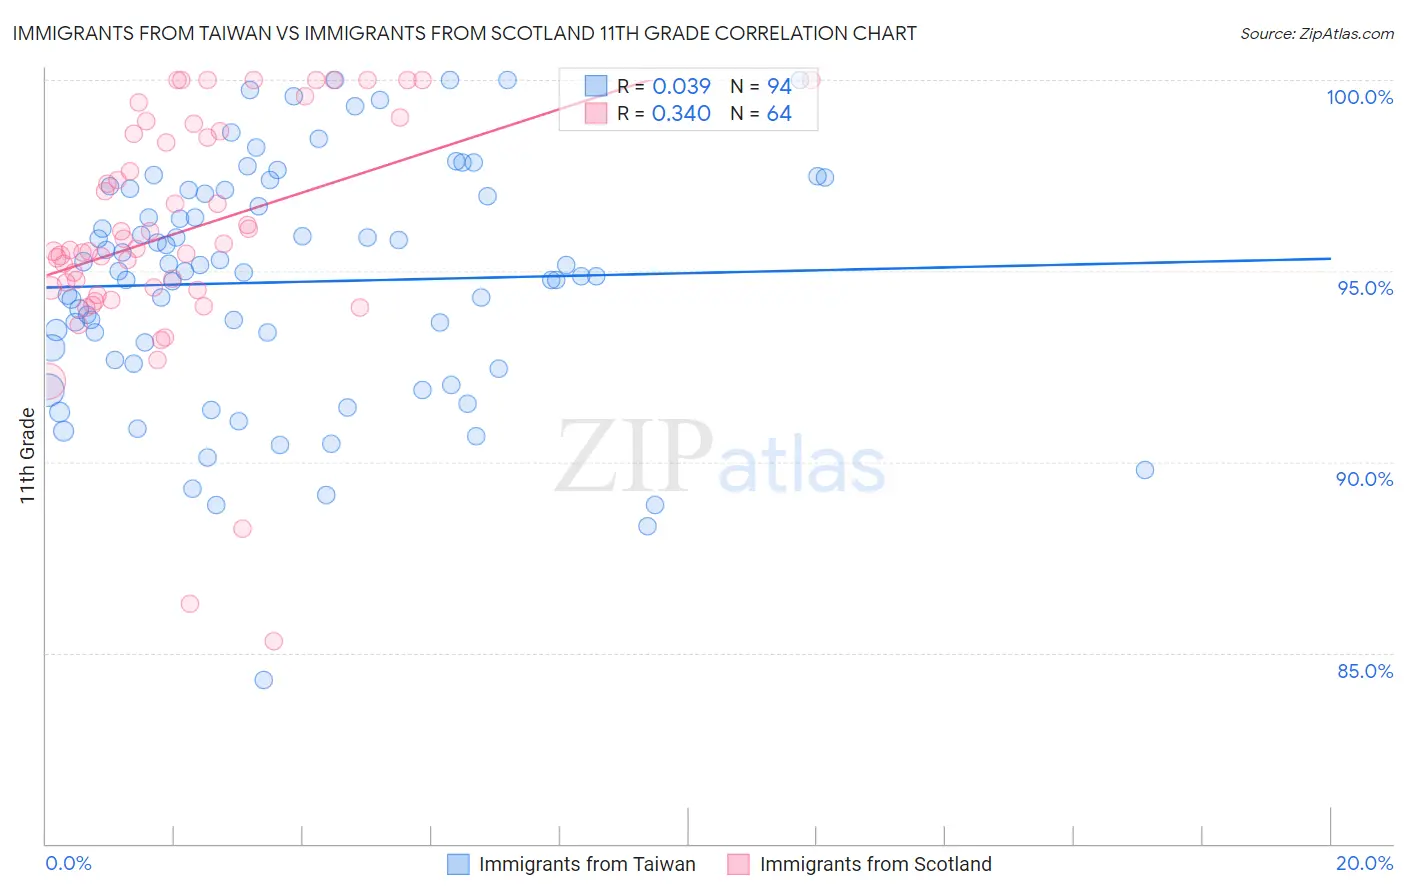 Immigrants from Taiwan vs Immigrants from Scotland 11th Grade